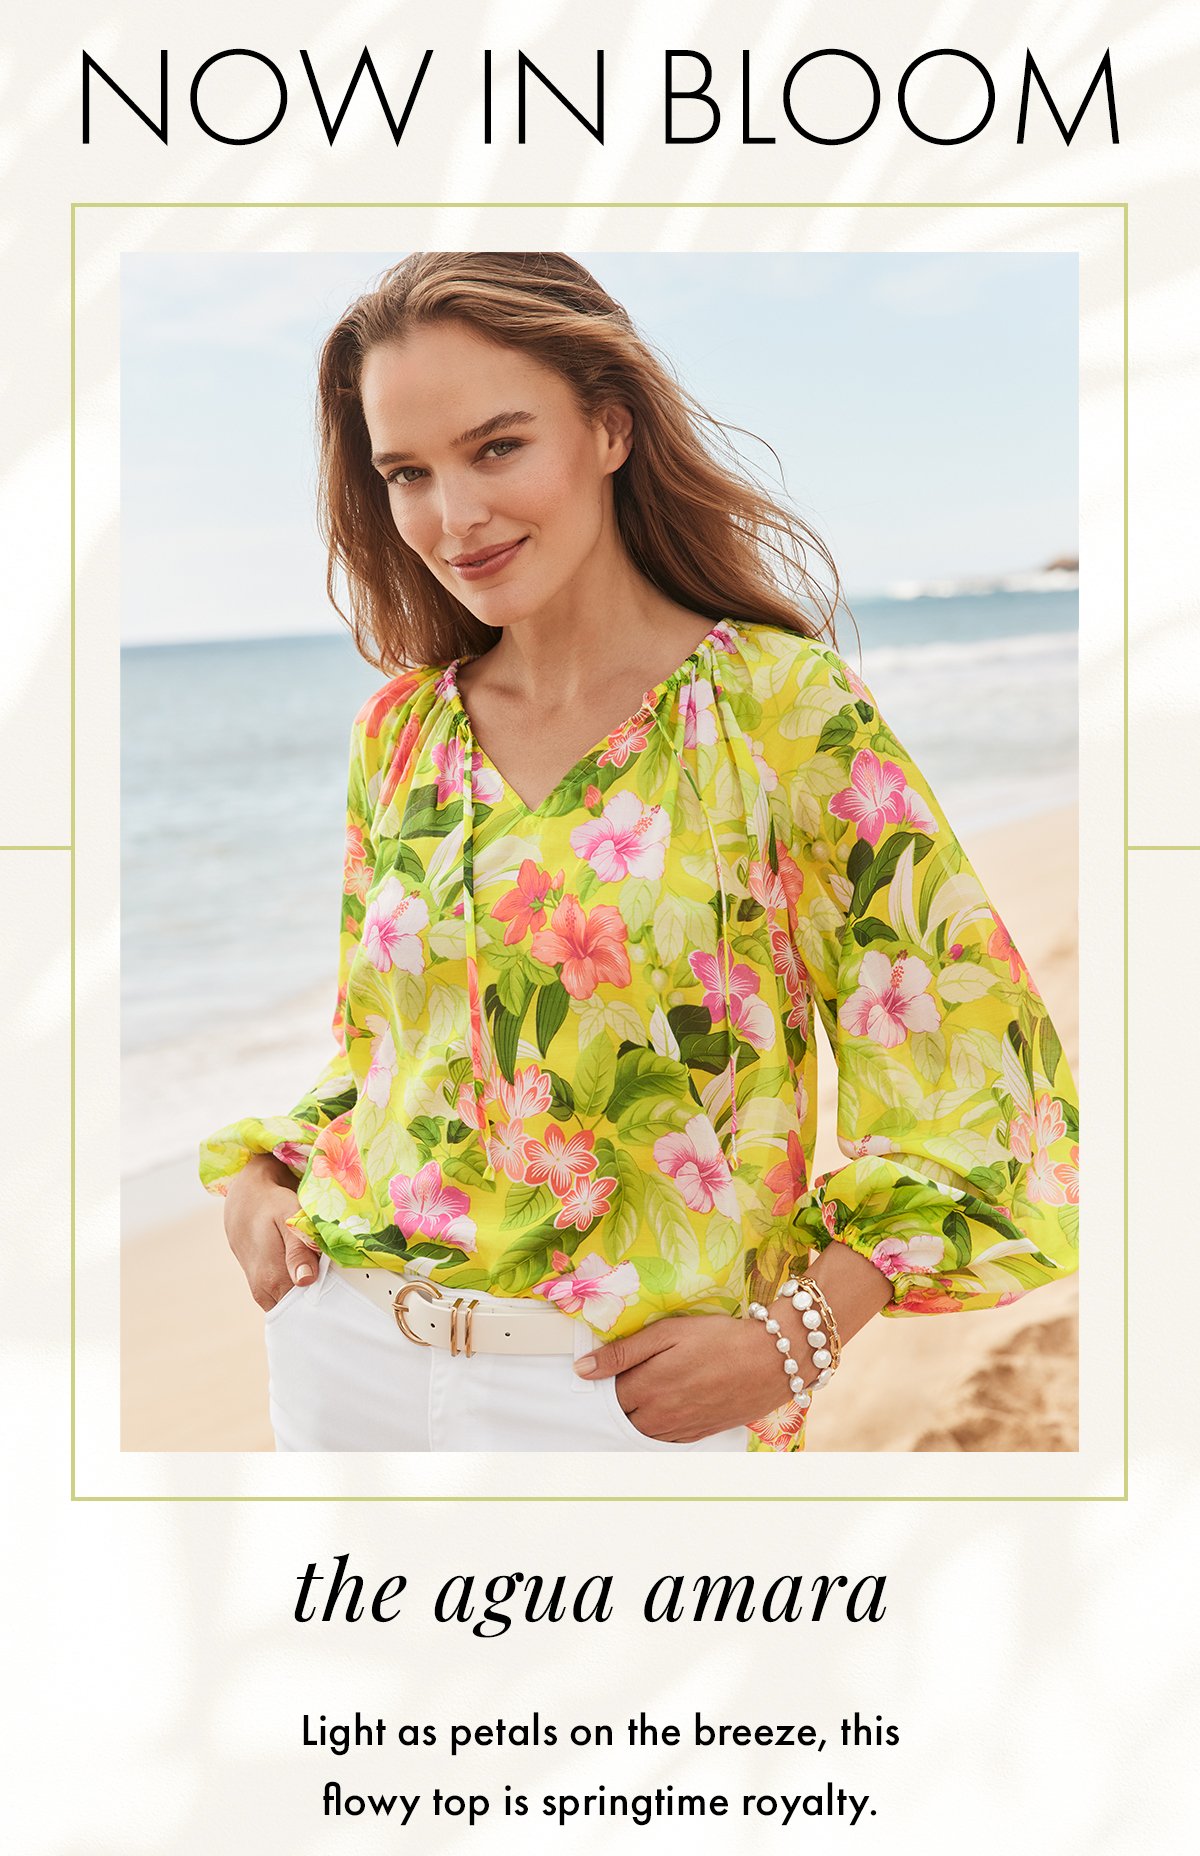 Now in bloom. The Agua Amara. Light as petals on the breeze, this flowy top is springtime royalty.